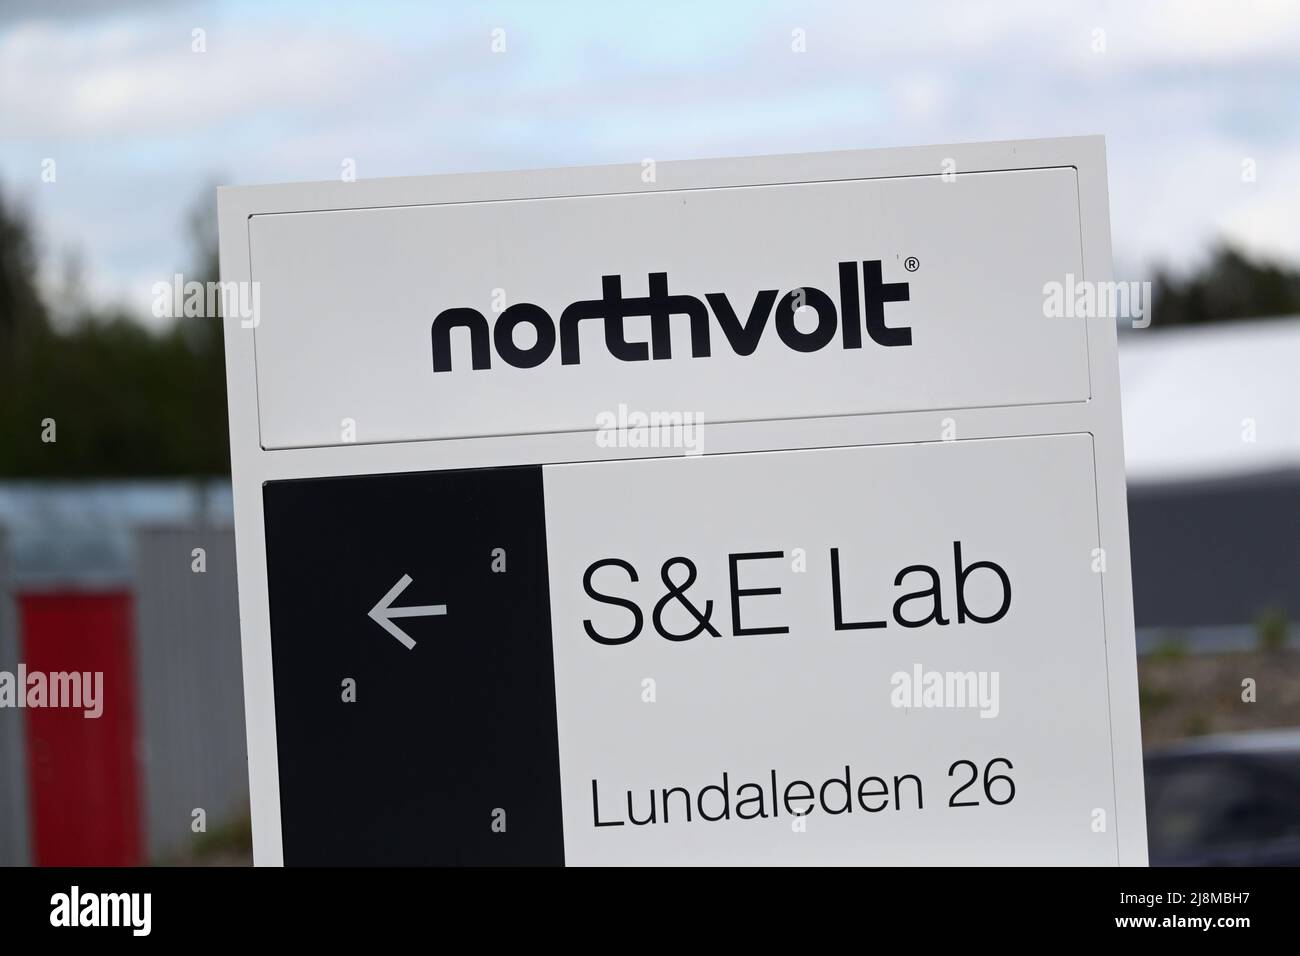 Northvolt company in Västerås, Sweden. Northvolt AB is a Swedish battery developer and manufacturer, specializing in lithium-ion technology for electric vehicles. Stock Photo